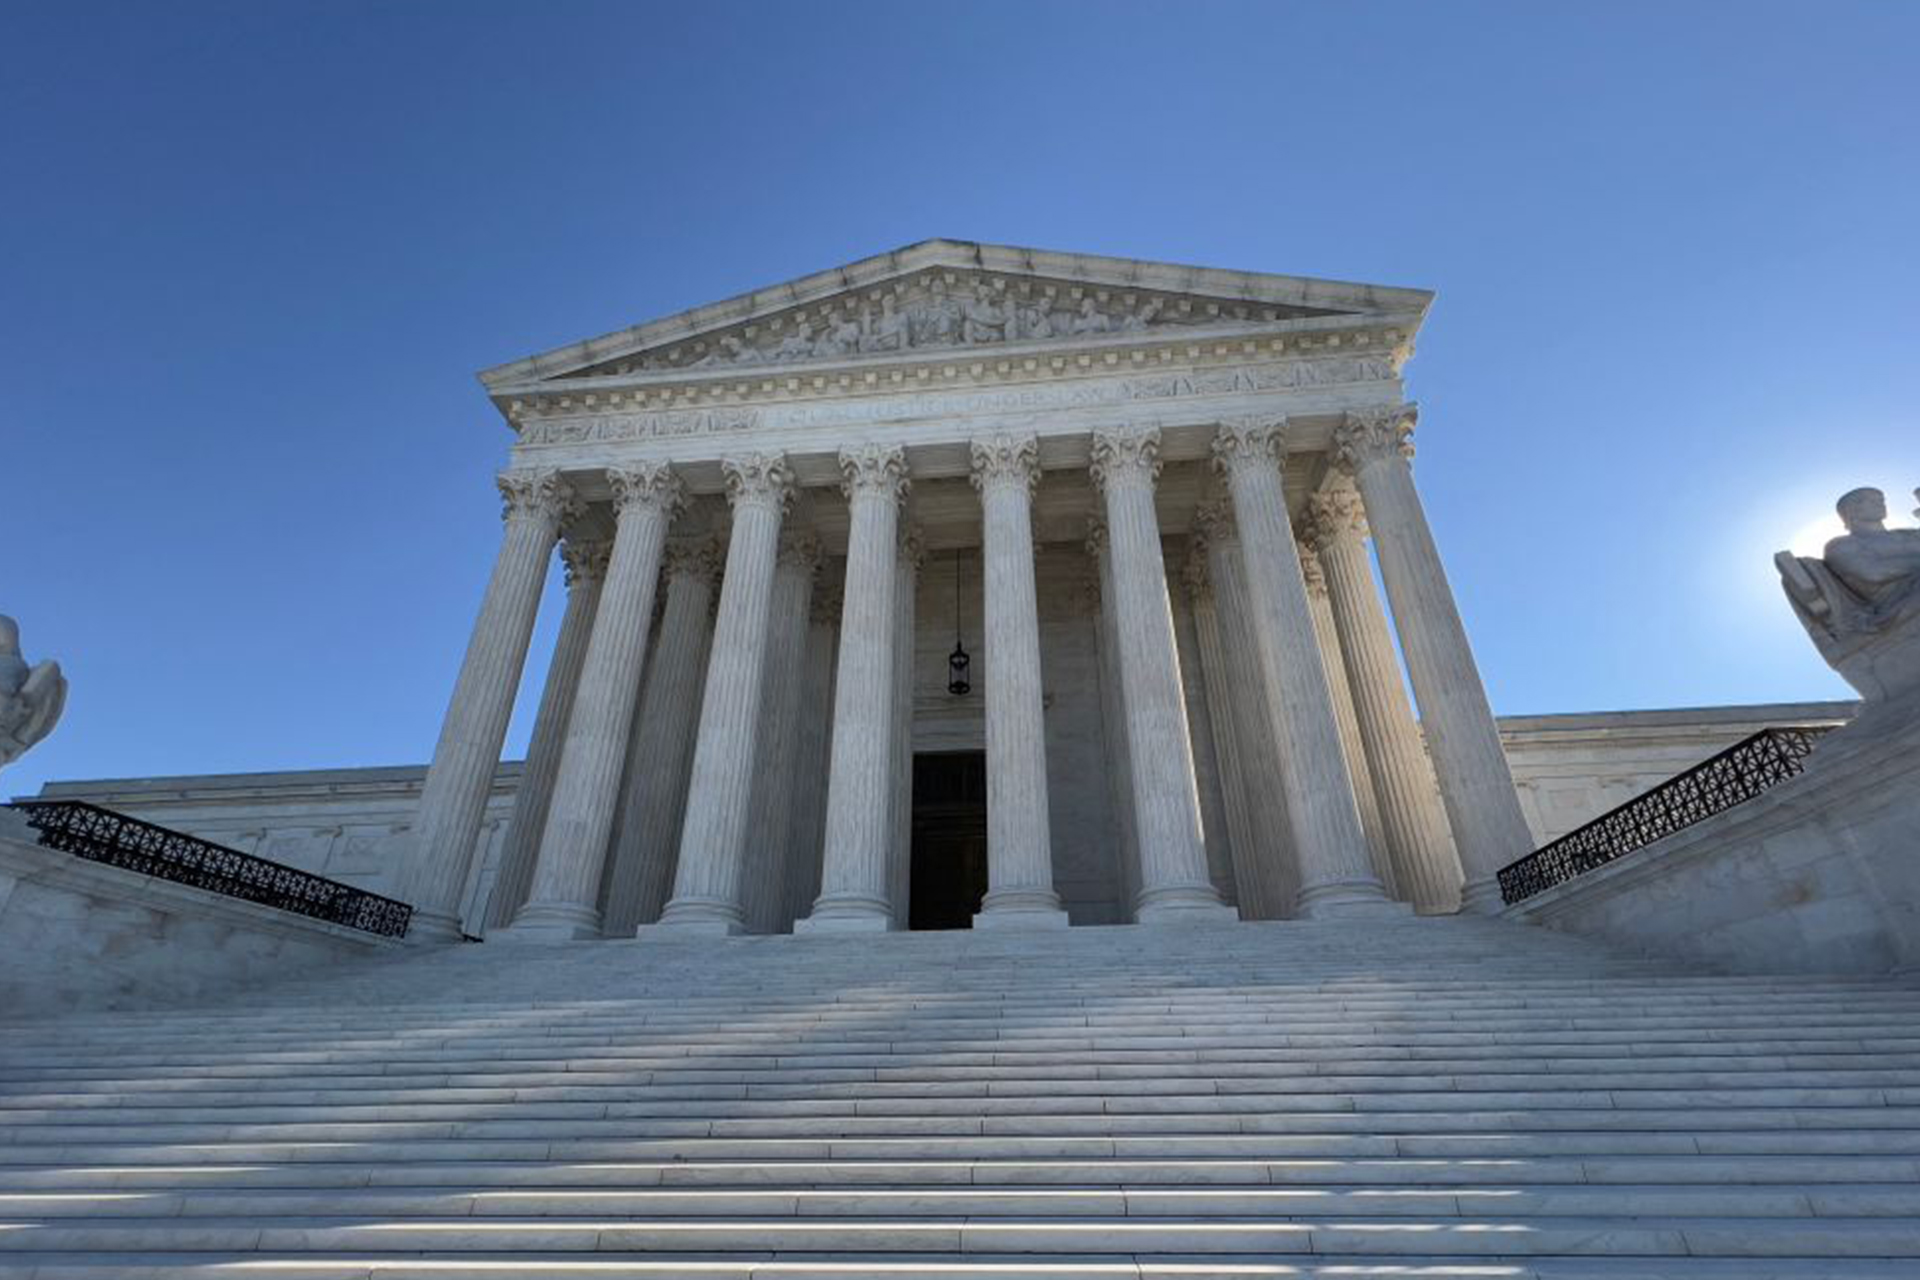 A photo of the exterior of the US Supreme Court Building